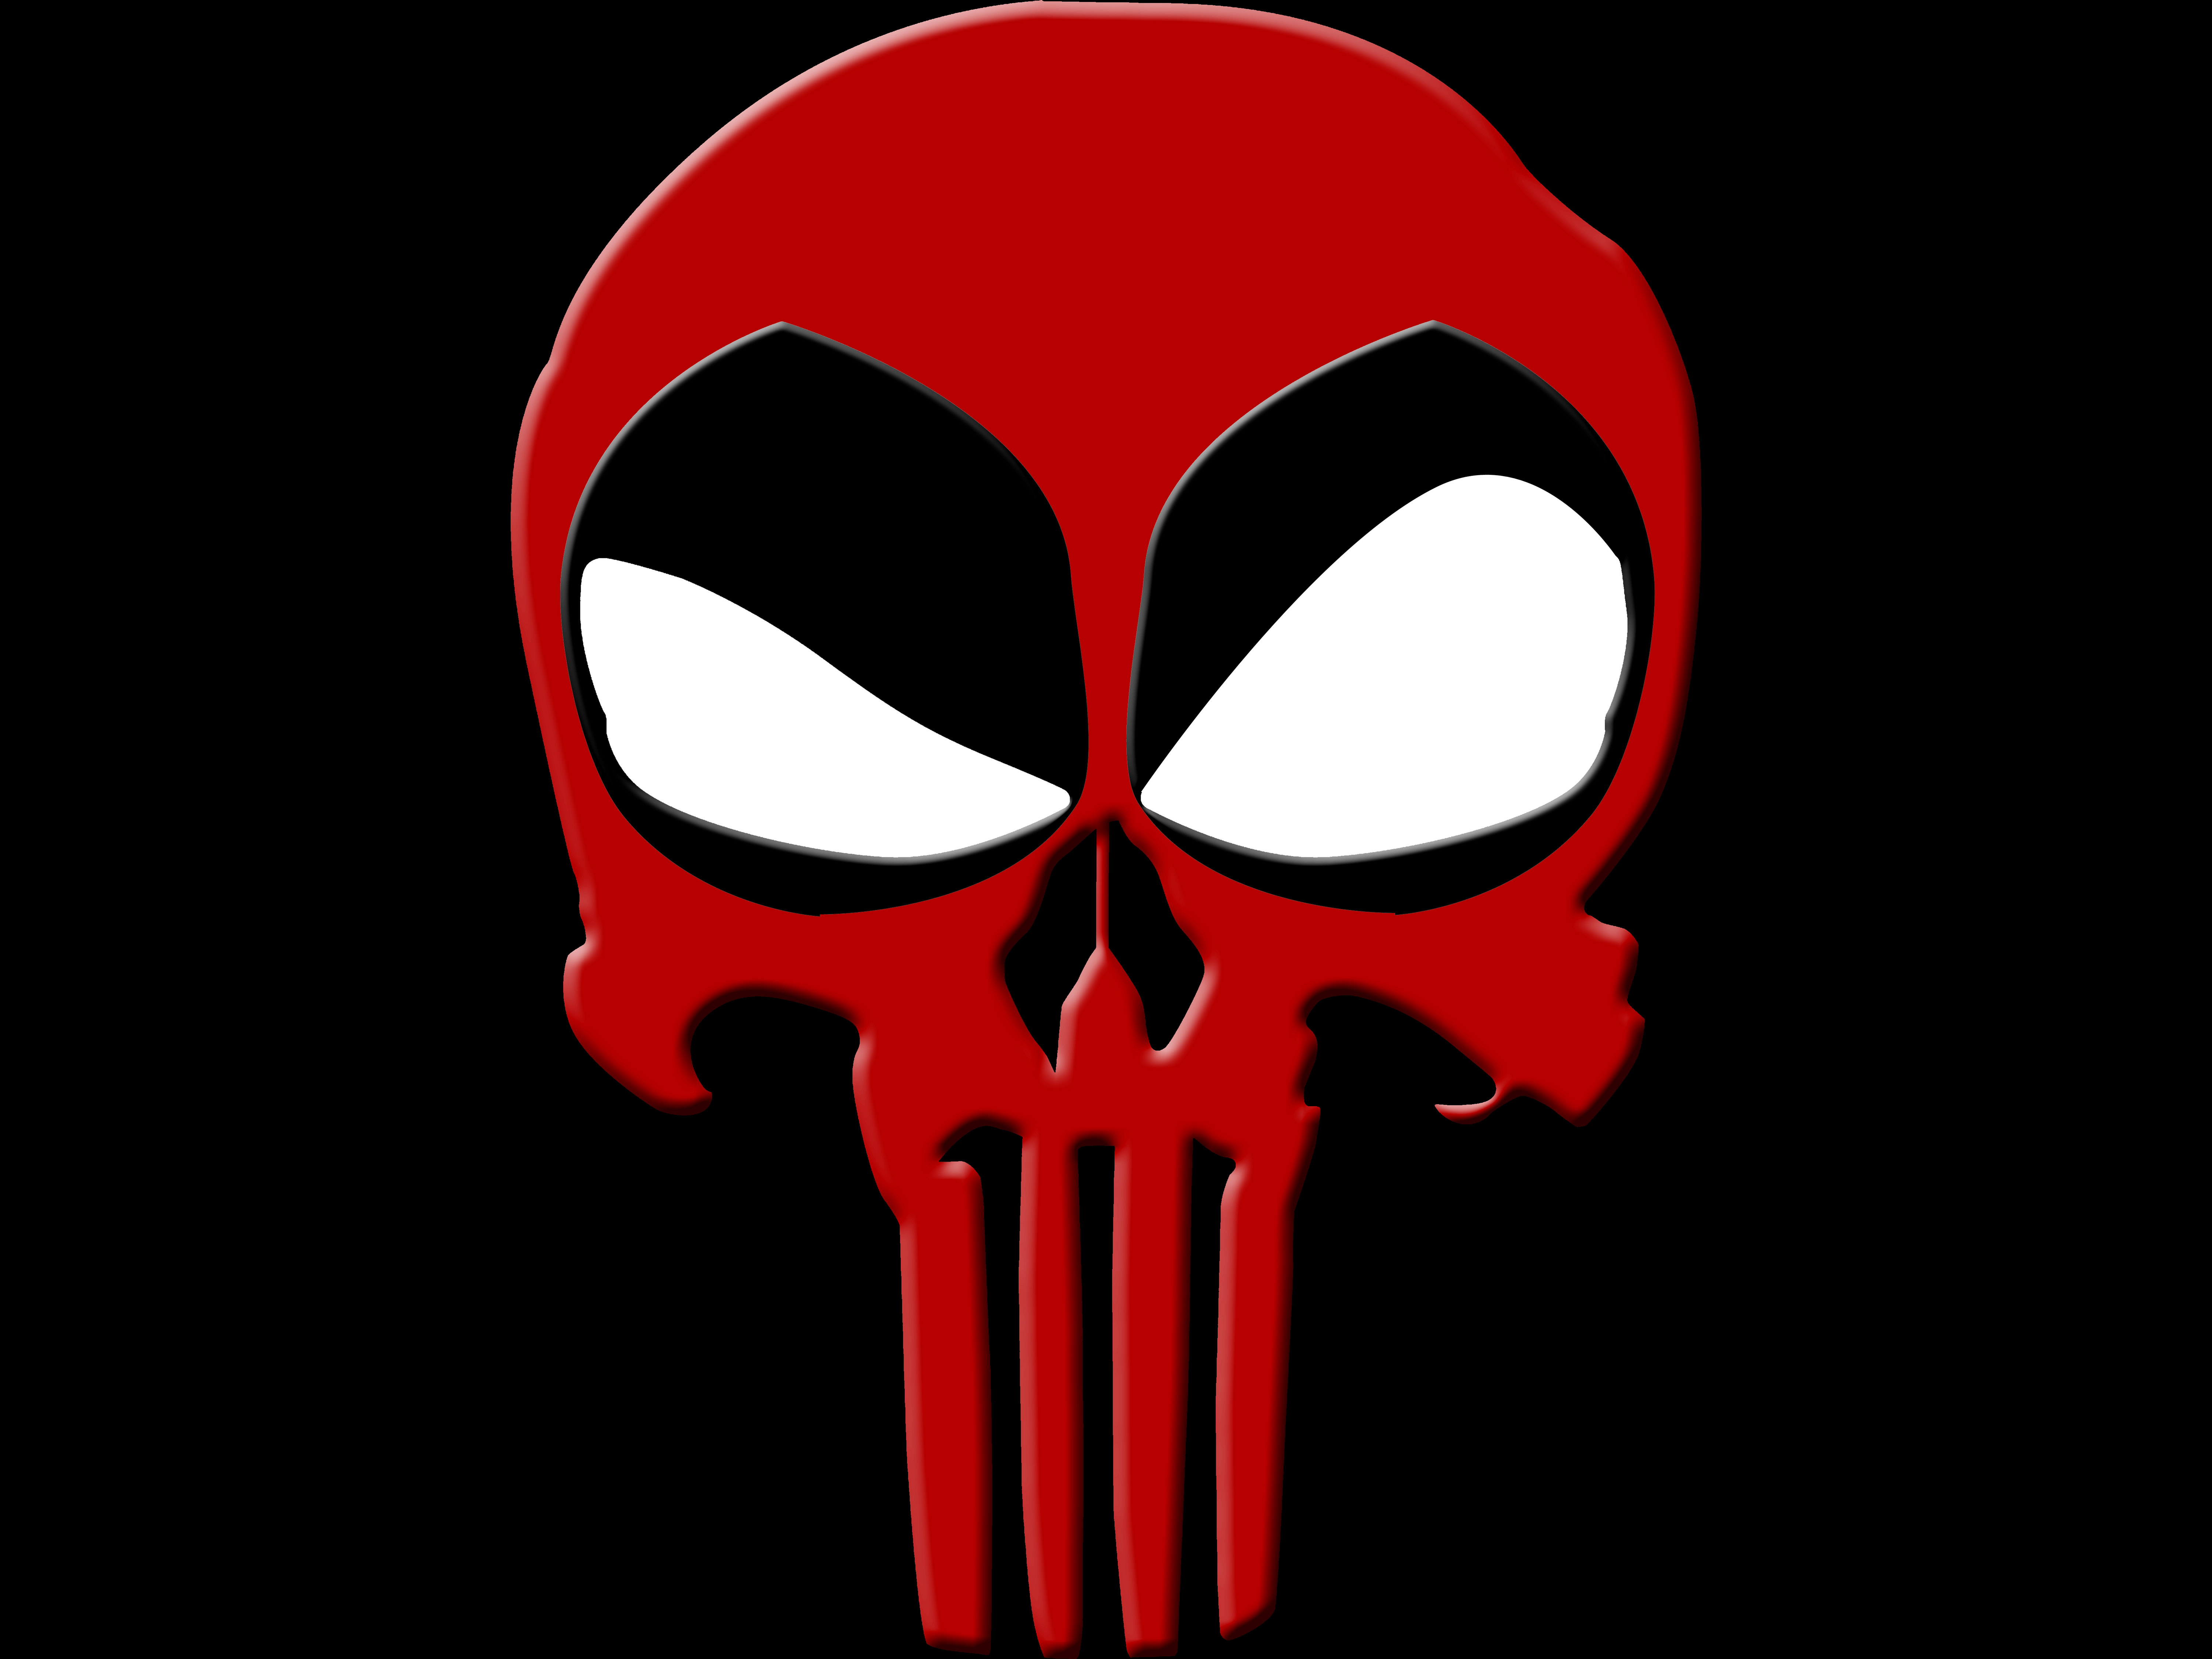 comics, deadpool, merc with a mouth, punisher lock screen backgrounds